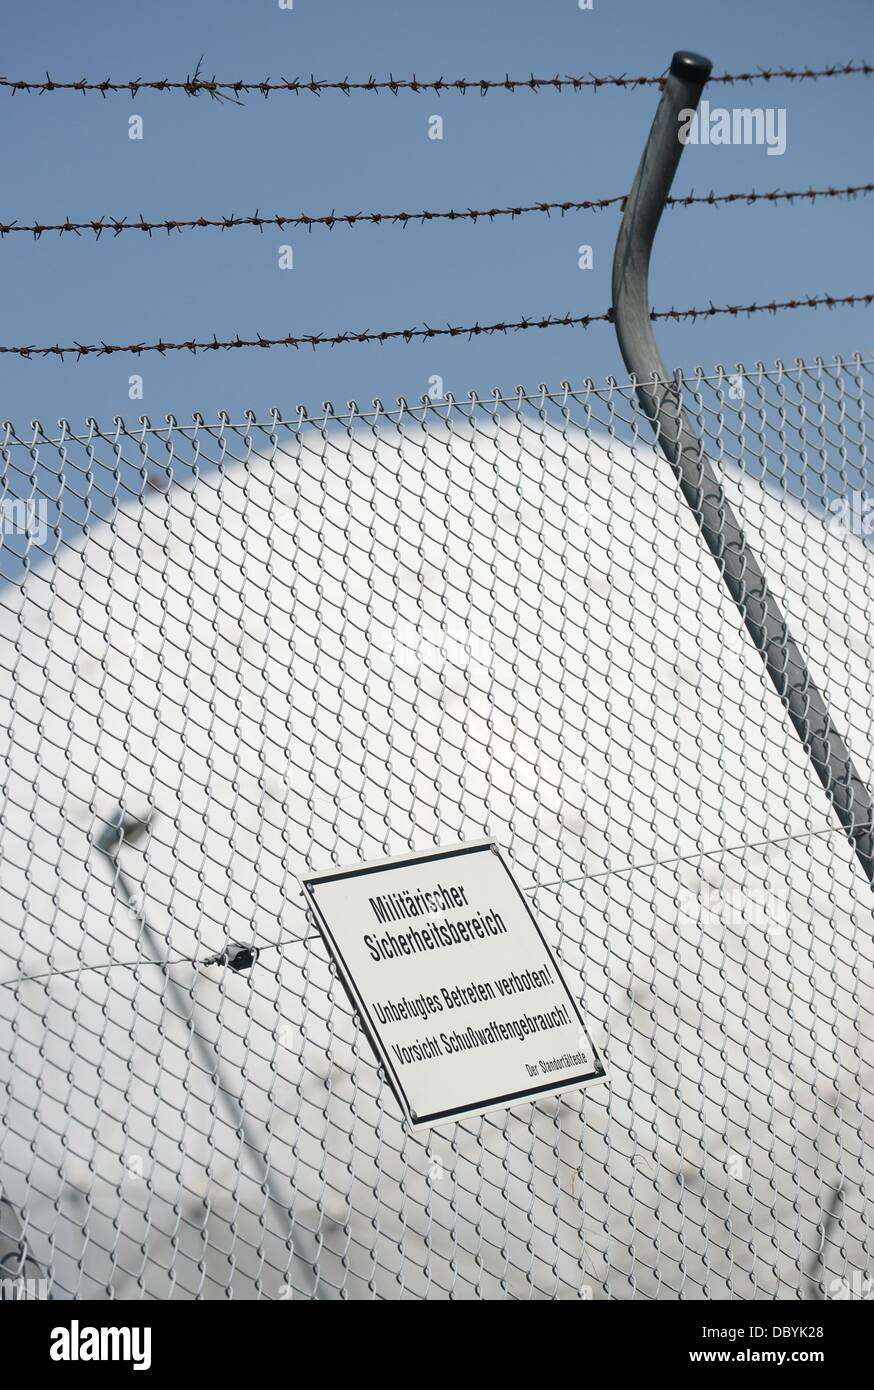 Bad Aibling, Germany. 06th Aug, 2013. Radomes (radar domes) are pictured behind a fence with a sign which reads 'Military Security Area' at the Bad Aibling Station near Bad Aibling, Germany, 06 August 2013. Bad Albing Station was a large spy station of US intelligence organization NSA (NAtional Security Agency). Photo: ANDREAS GEBERT/dpa/Alamy Live News Stock Photo